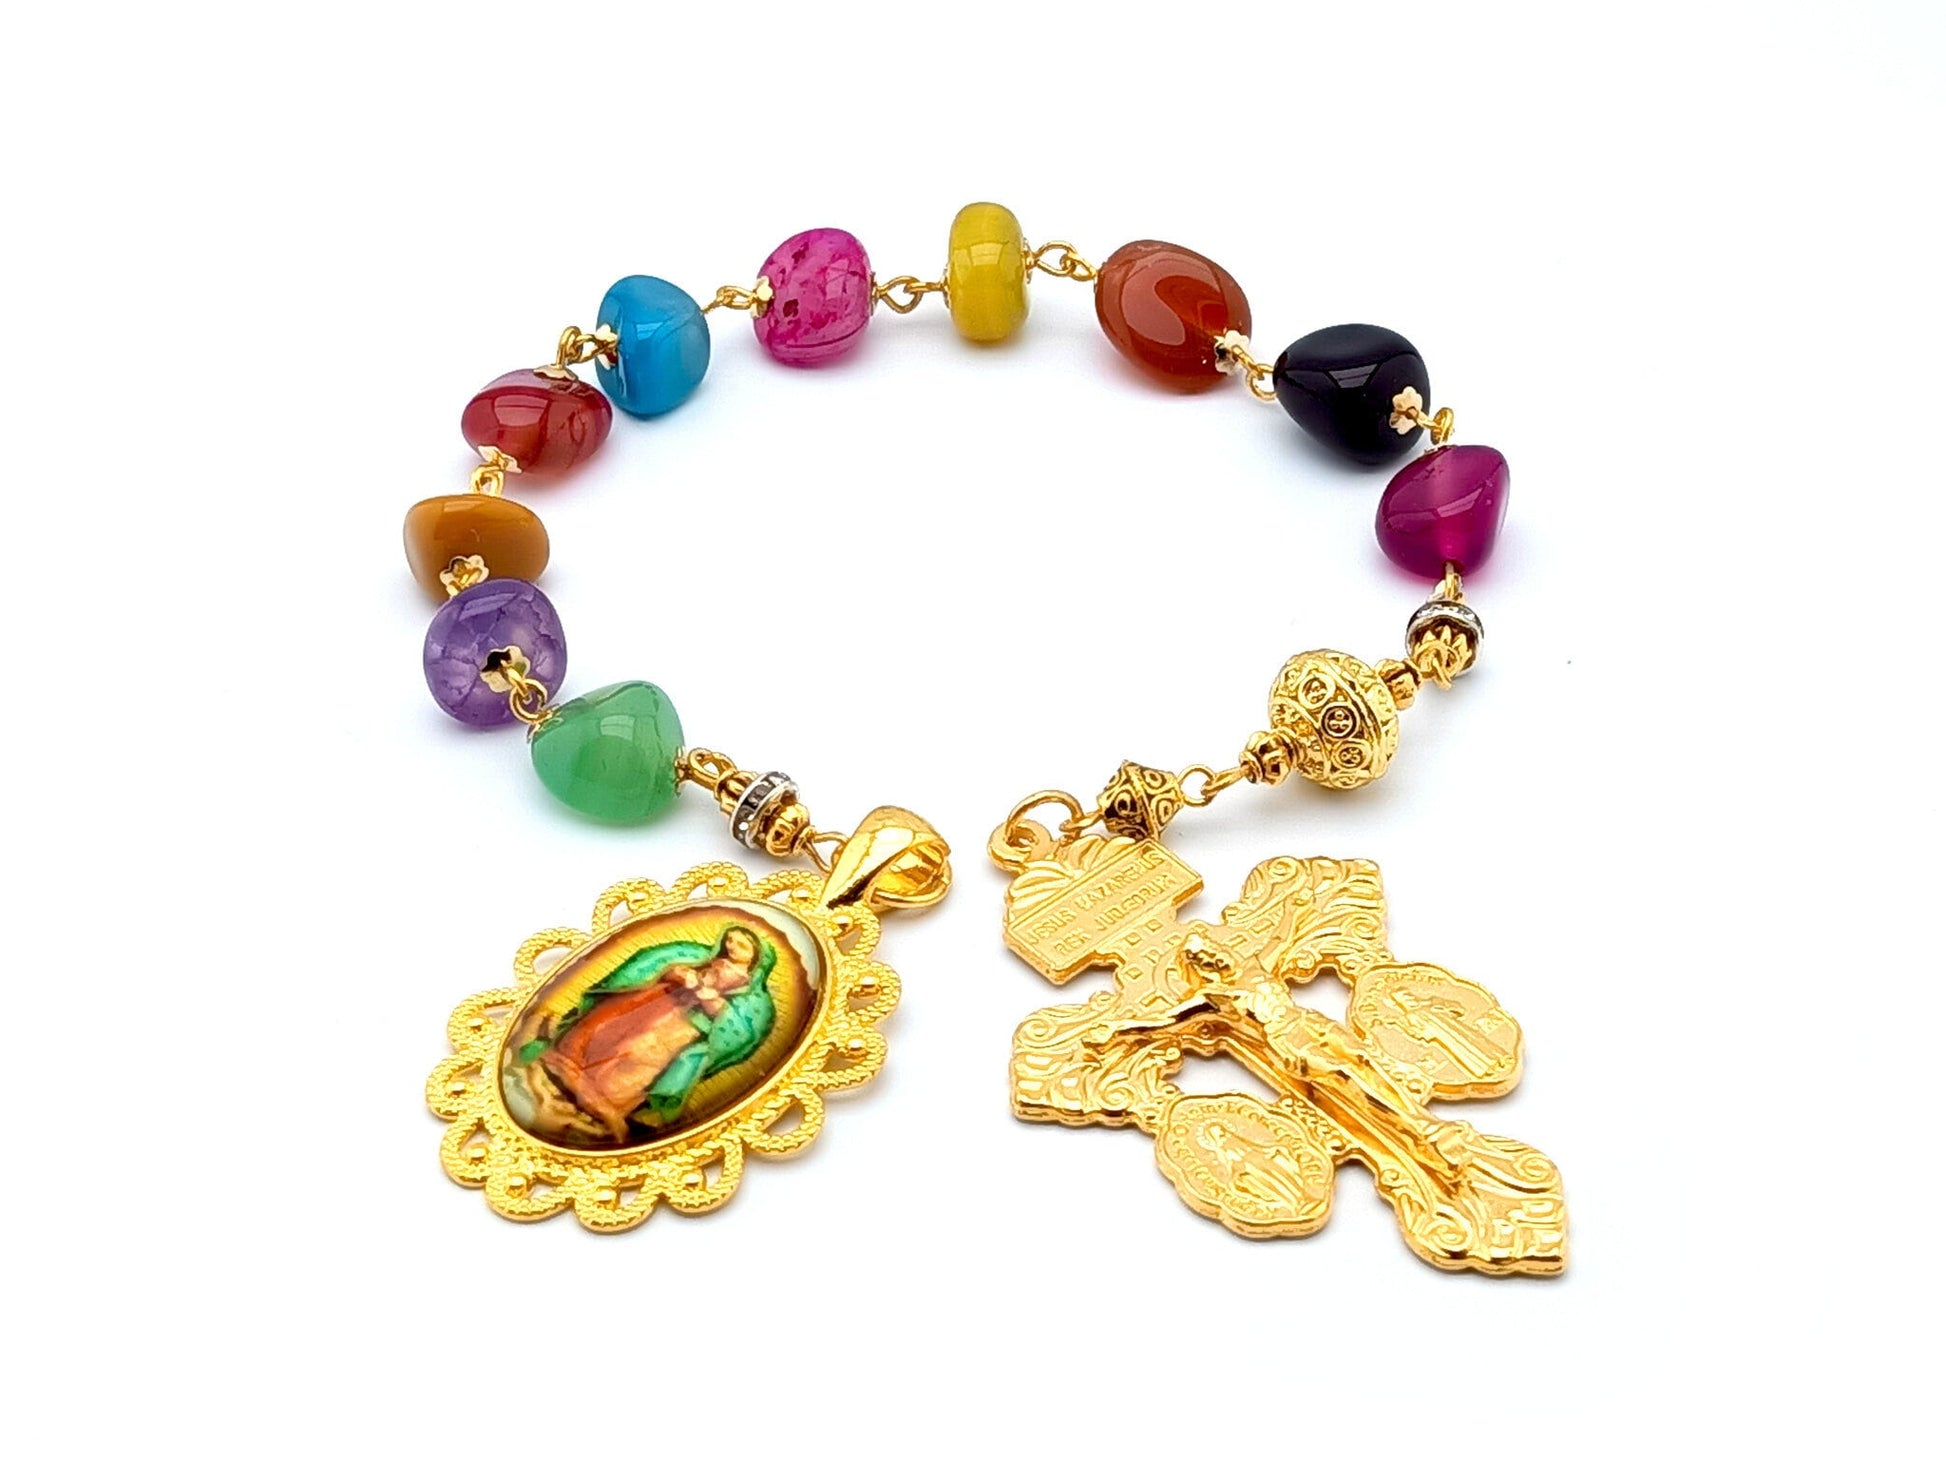 Our Lady of Guadalupe unique rosary beads single decade rosary with multi coloured nugget gemstone beads, golden pardon crucifix and picture centre medal.